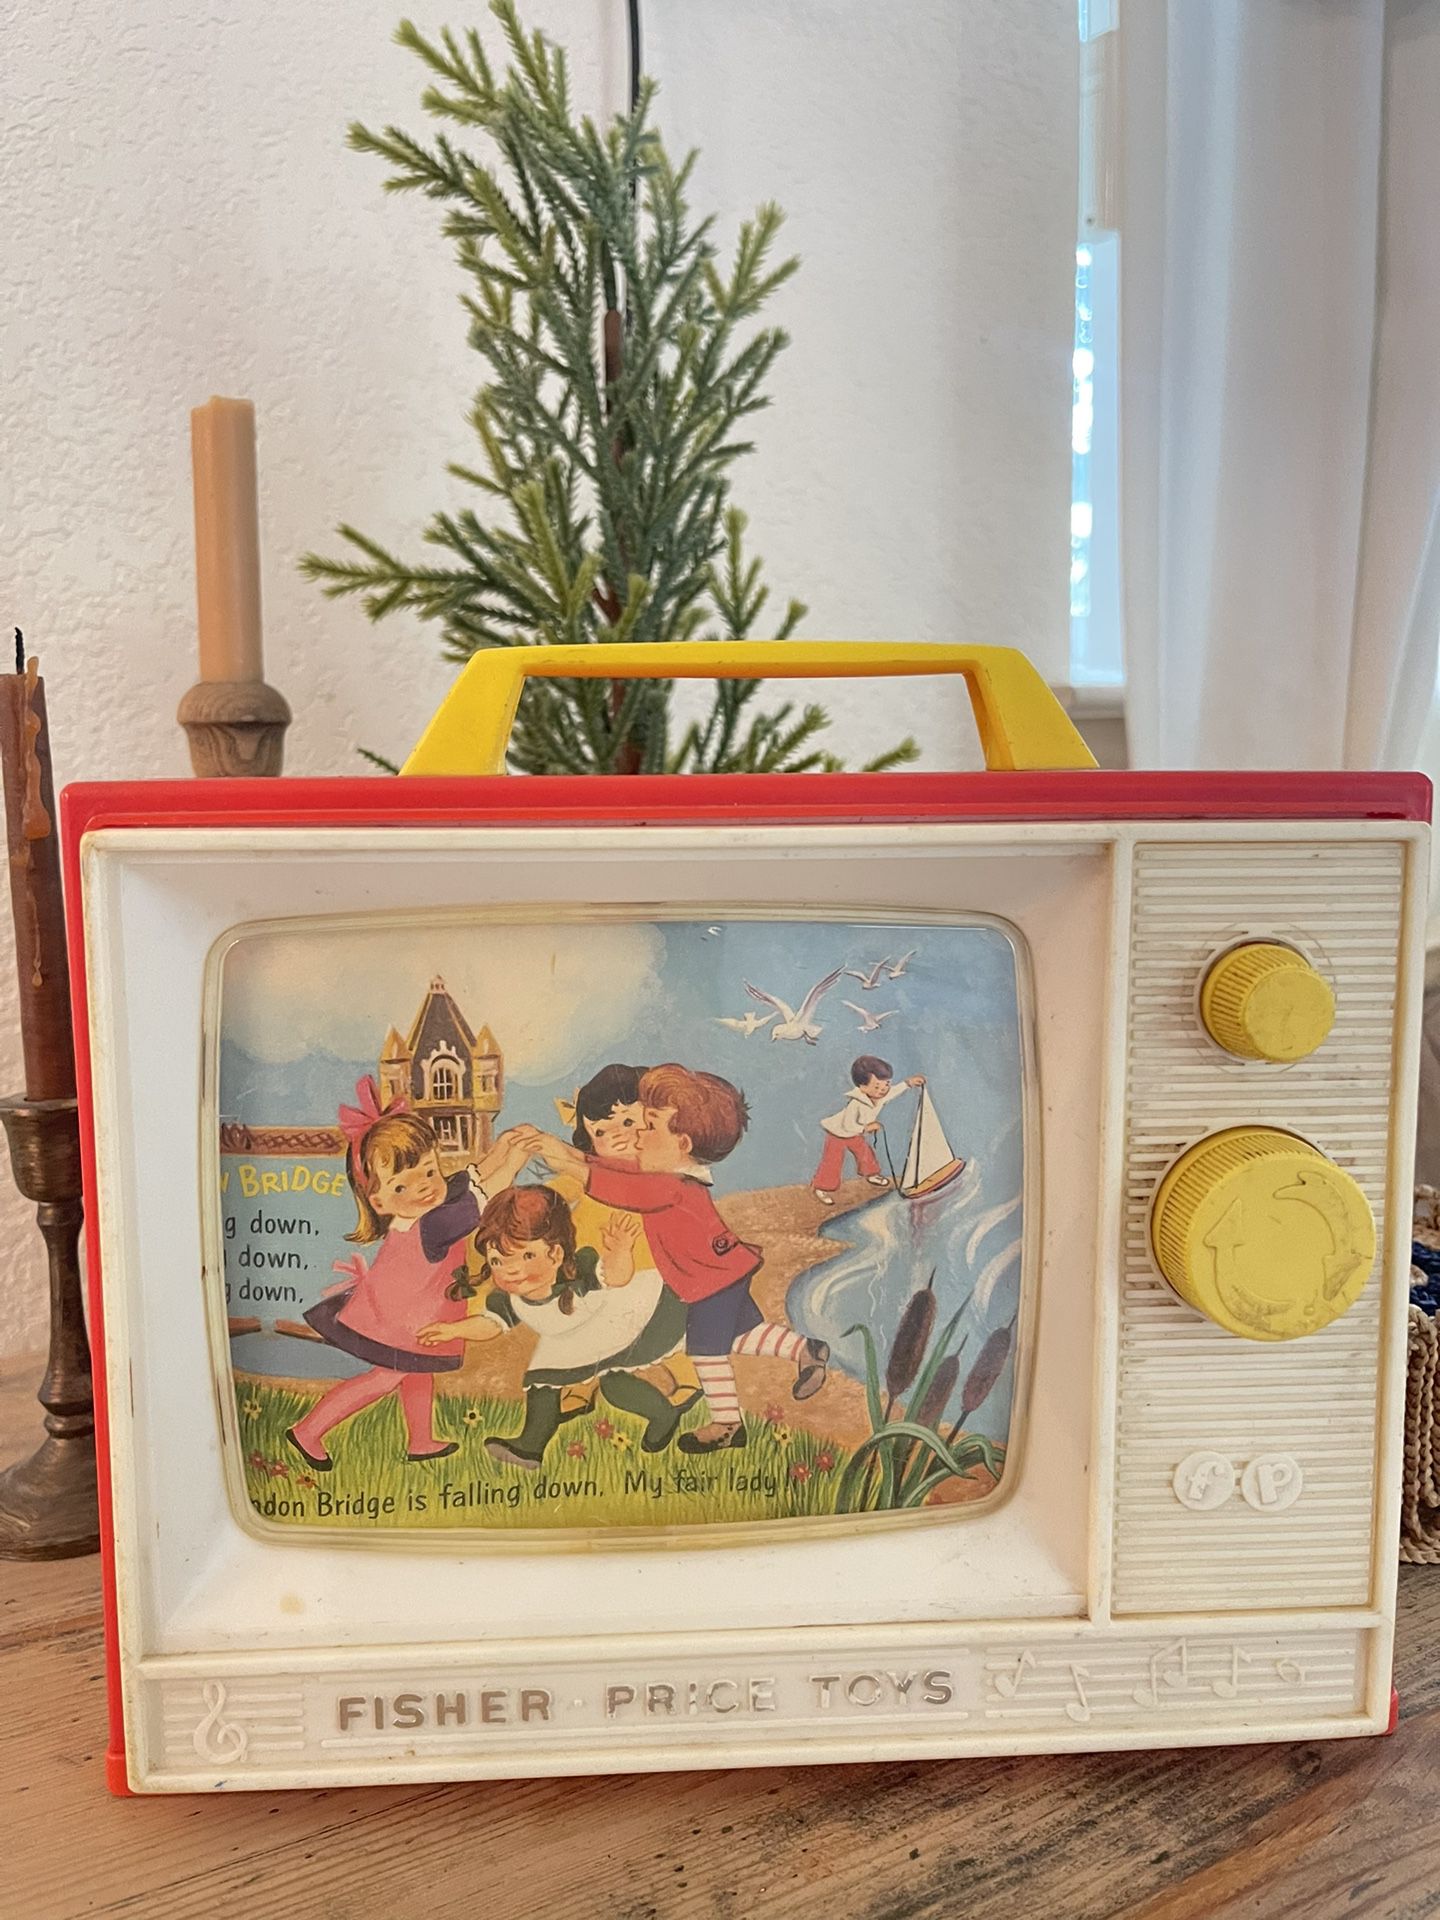 Vintage Picture Prize Music, Tv Box Toy 